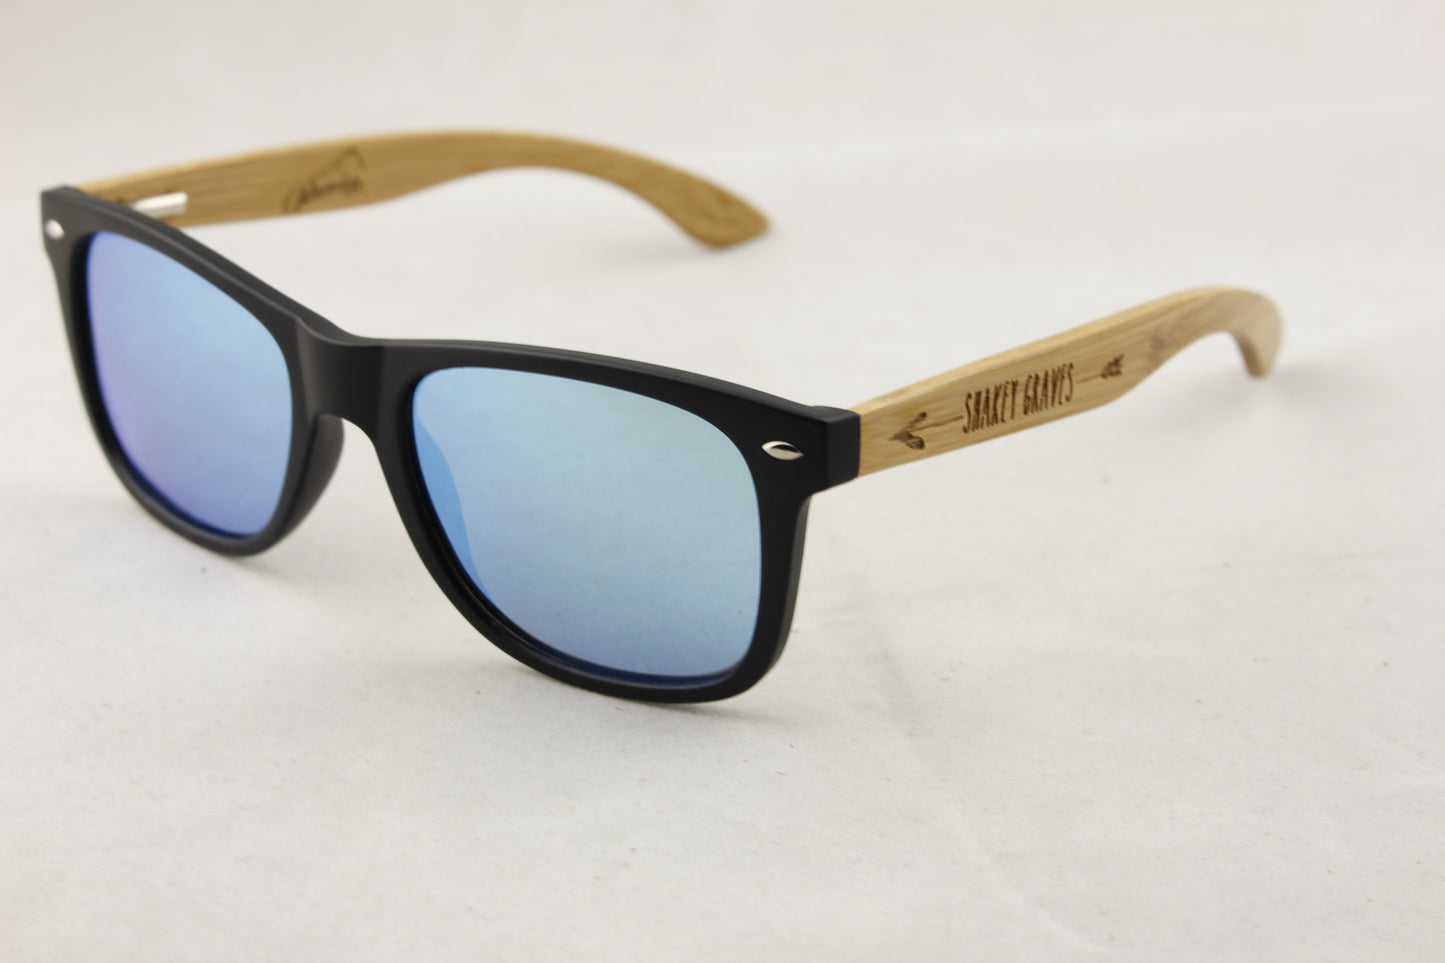 Wander & Co. x SHAKEY GRAVES Limited Edition Bamboo Sunglasses